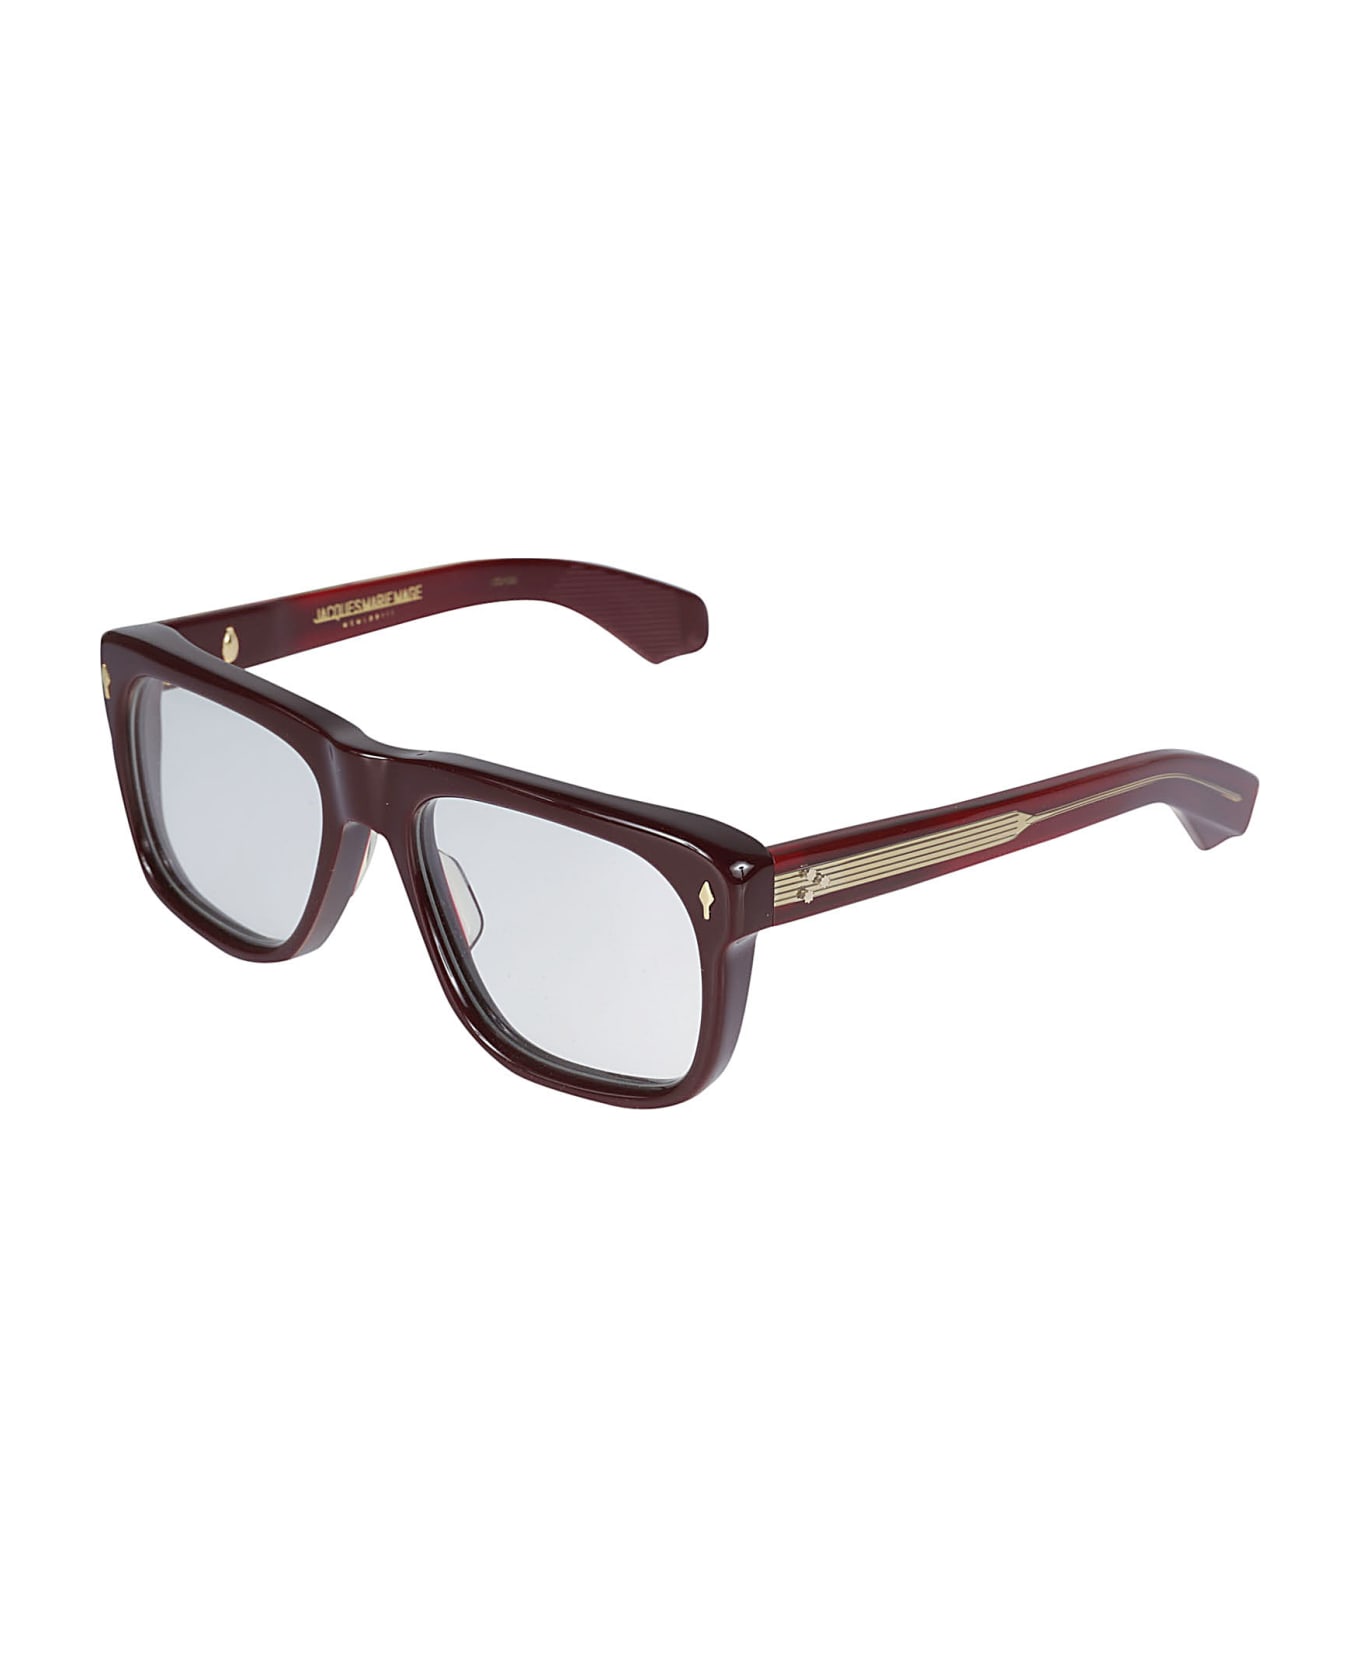 Jacques Marie Mage Yves Glasses - Red